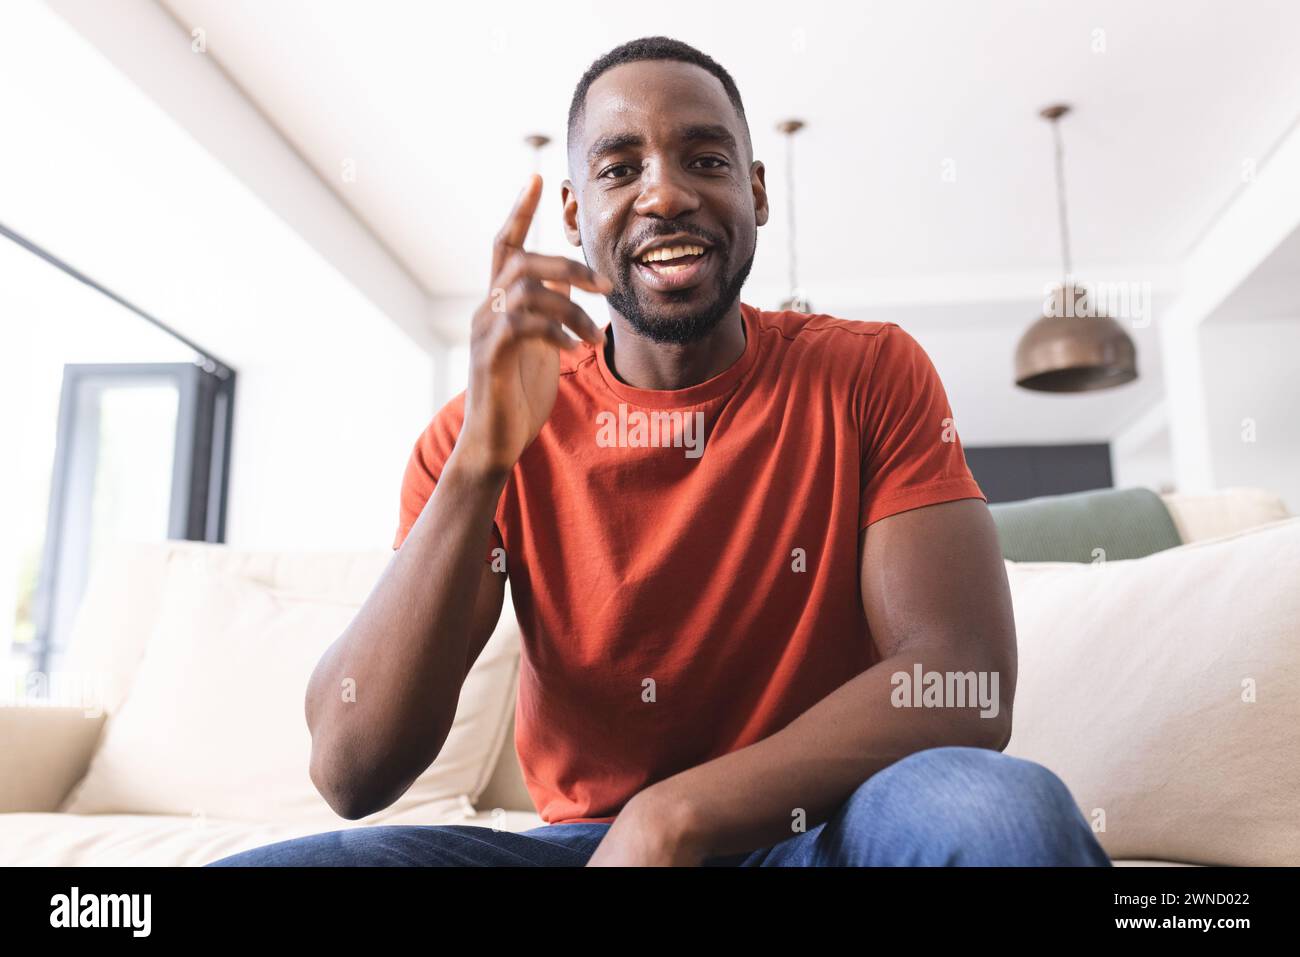 African American man in a red shirt gestures with his index finger, smiling warmly on a video call Stock Photo